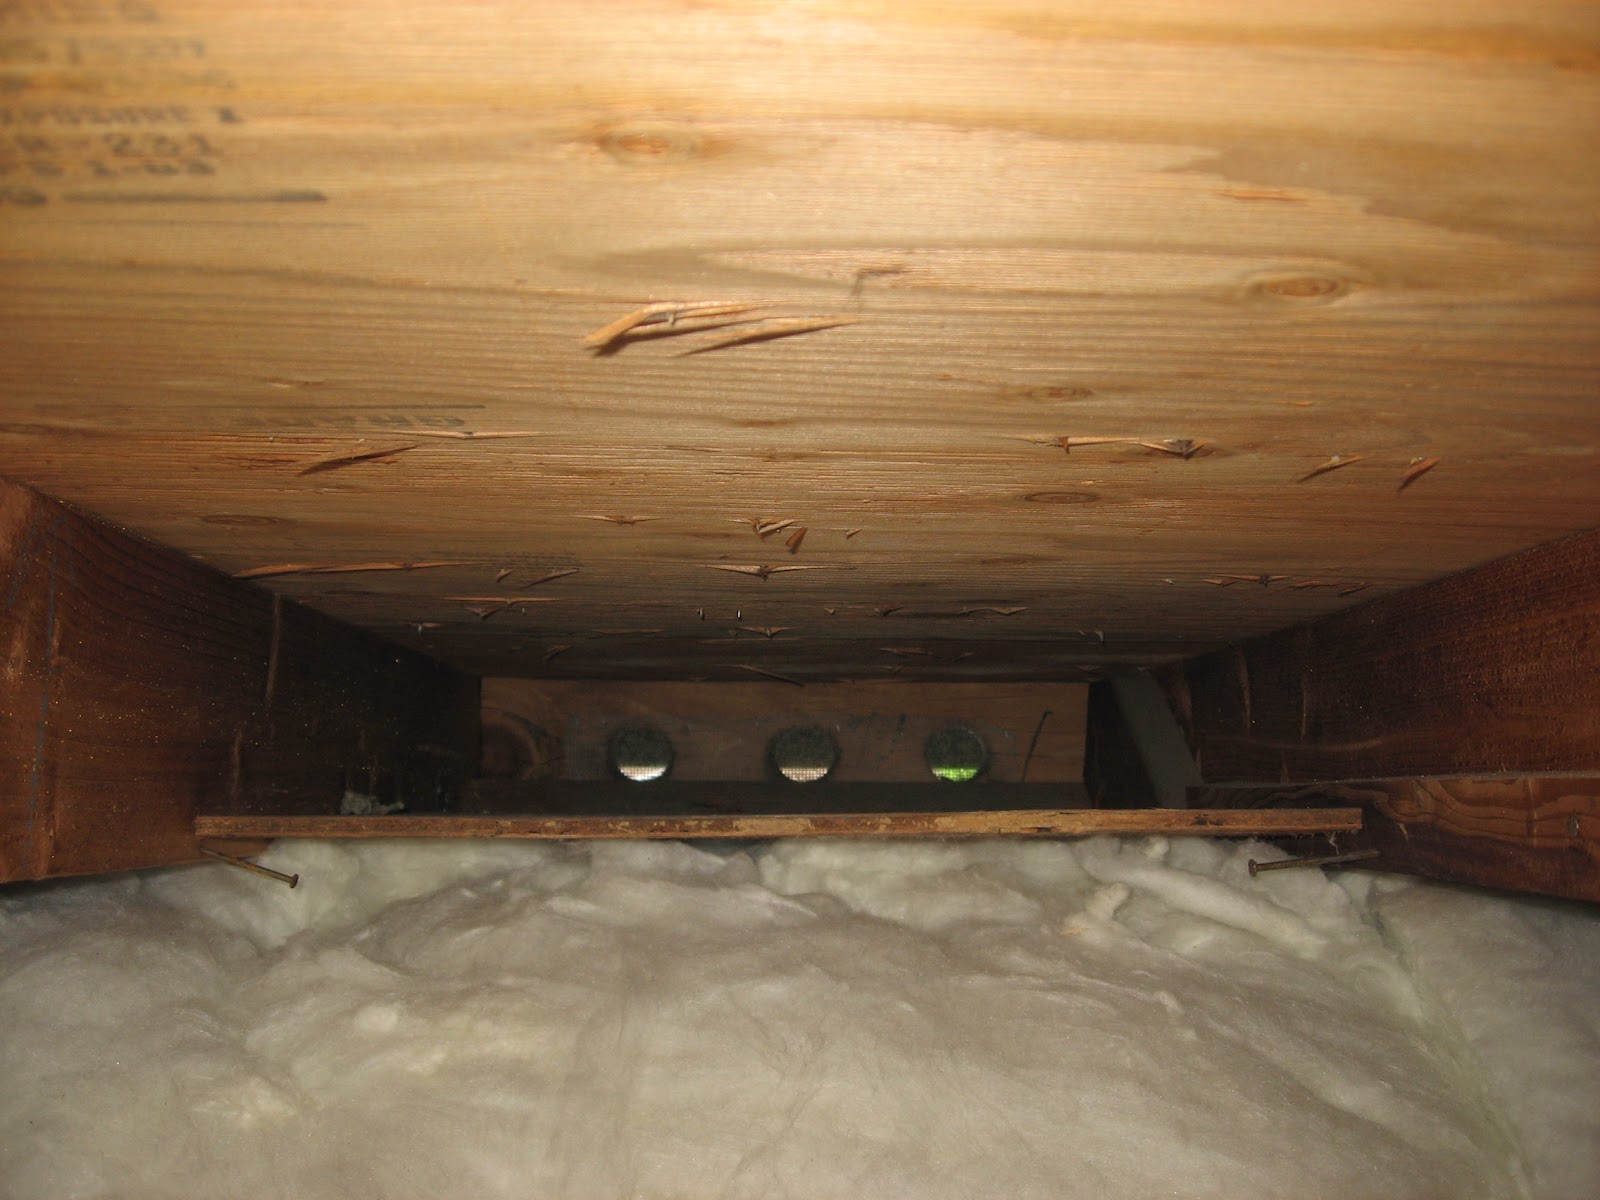 Energy Conservation How To JobInspired Lessons In ExistingHome Attic Ventilation